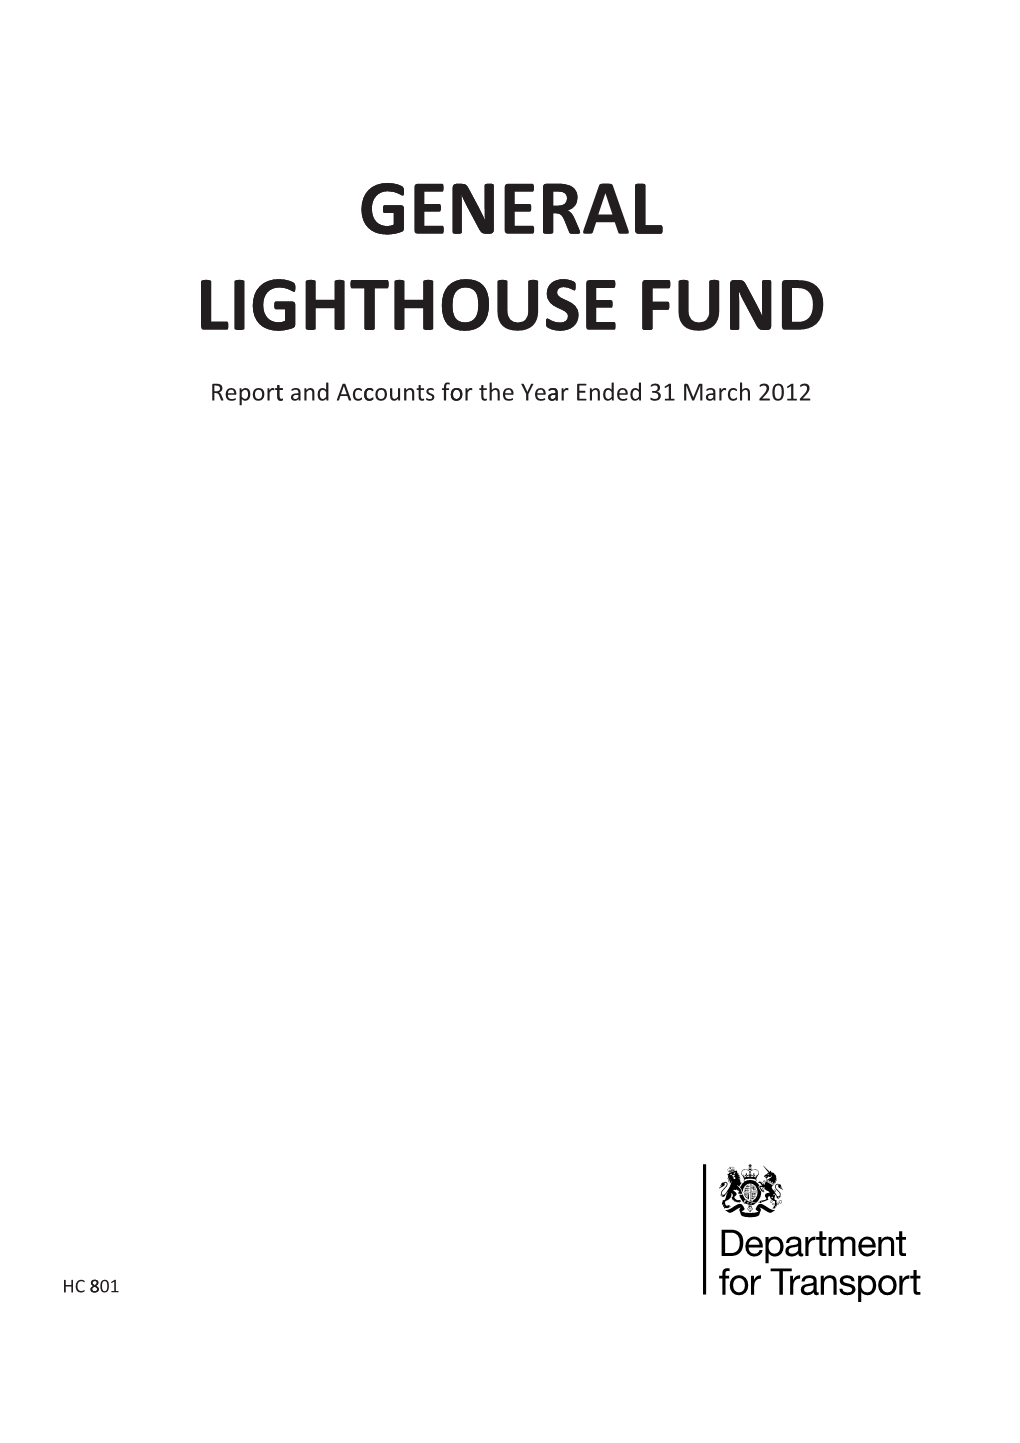 General Lighthouse Fund